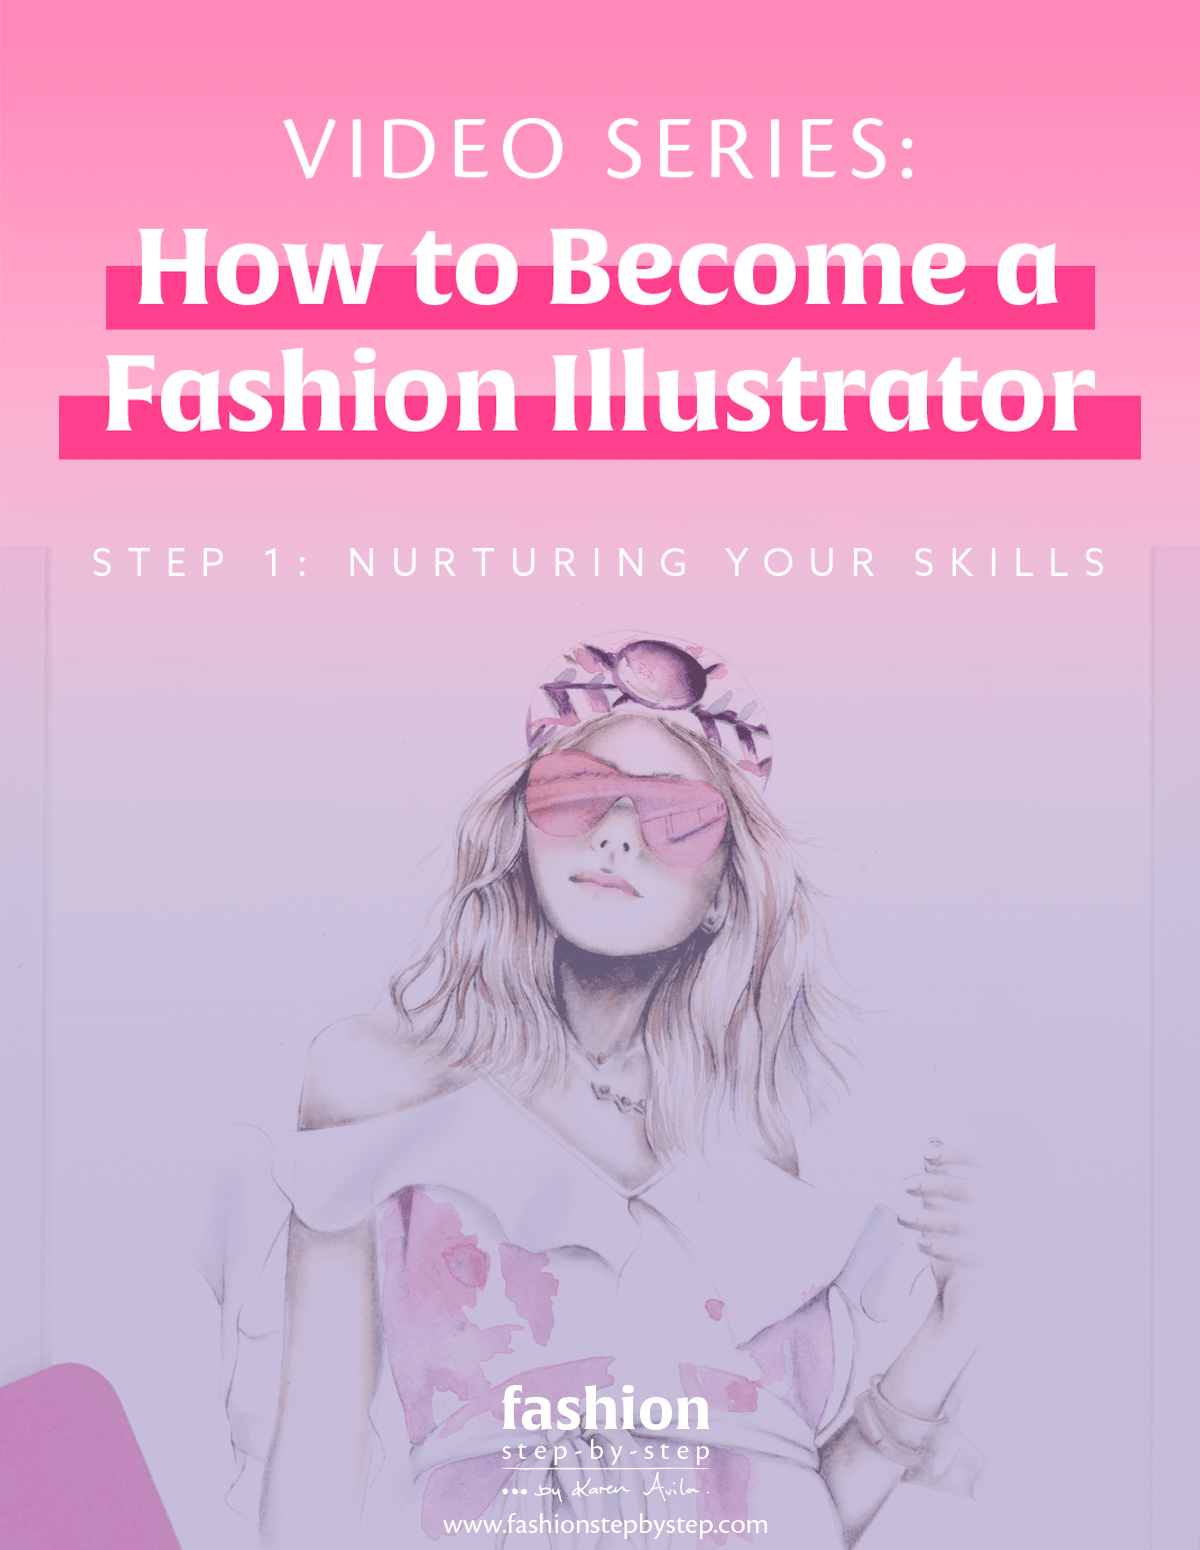 How to Become a Fashion Illustrator - Step 1 - Fashion Step-by-Step